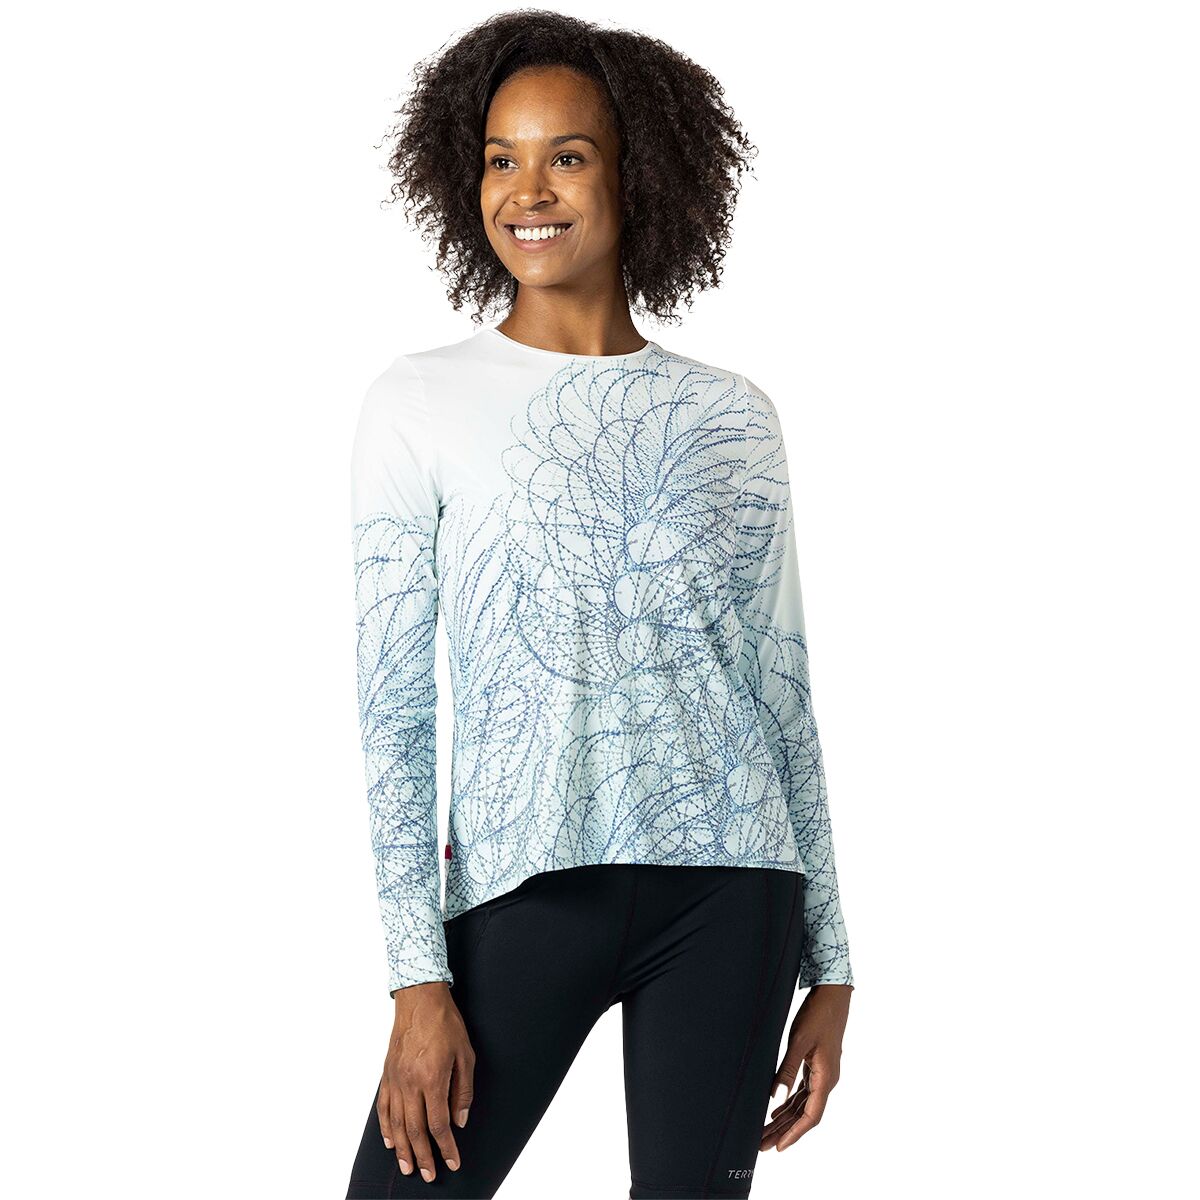 Terry Bicycles Soleil Free Long-Sleeve Top - Women's